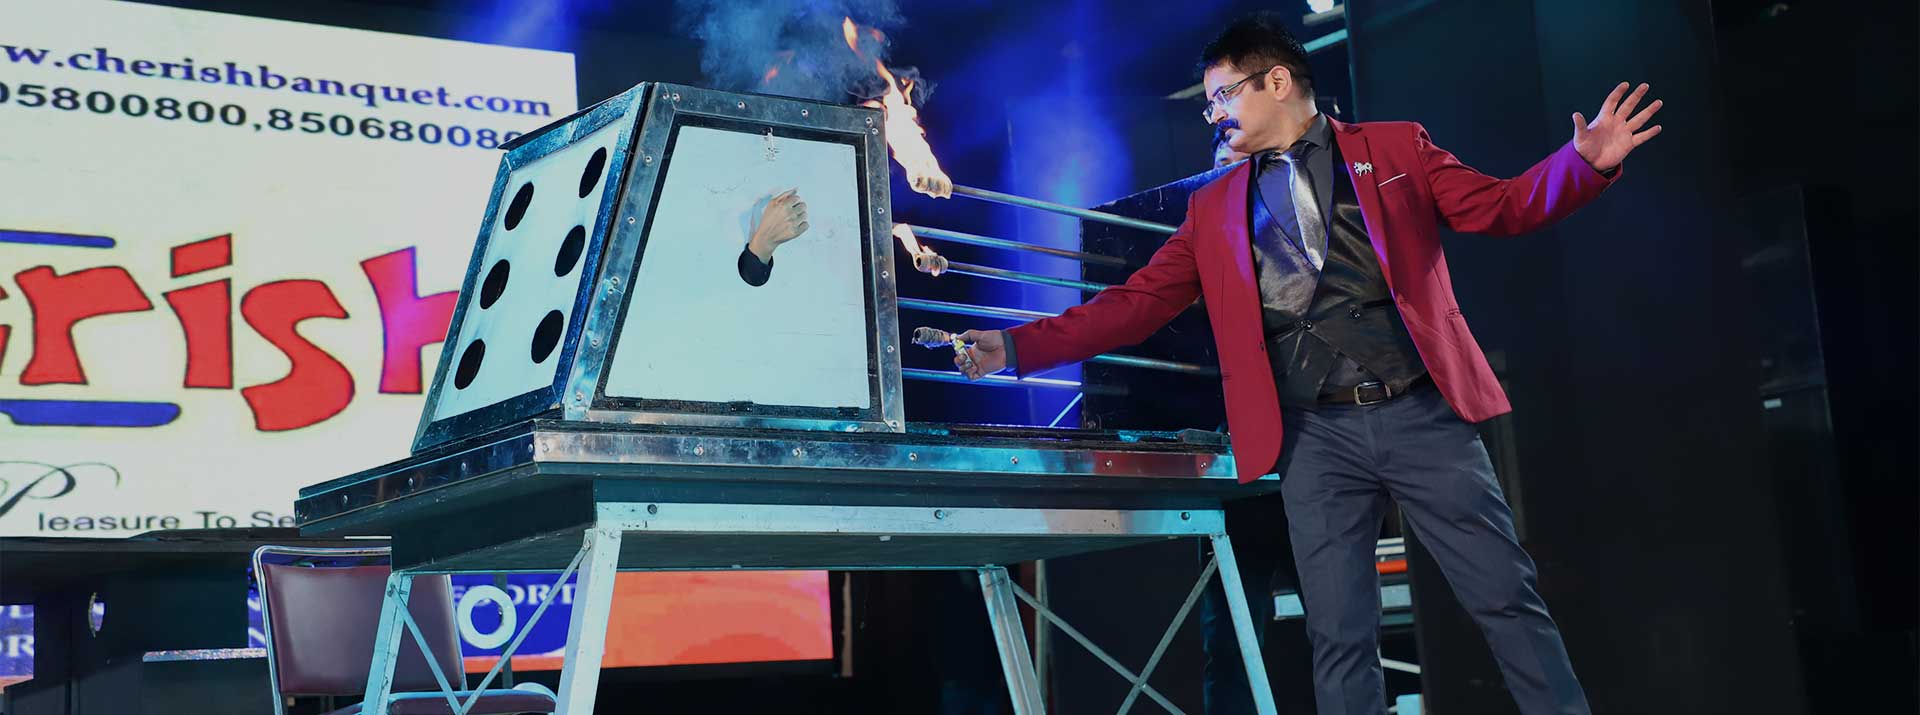 What Makes a Good Illusionist?